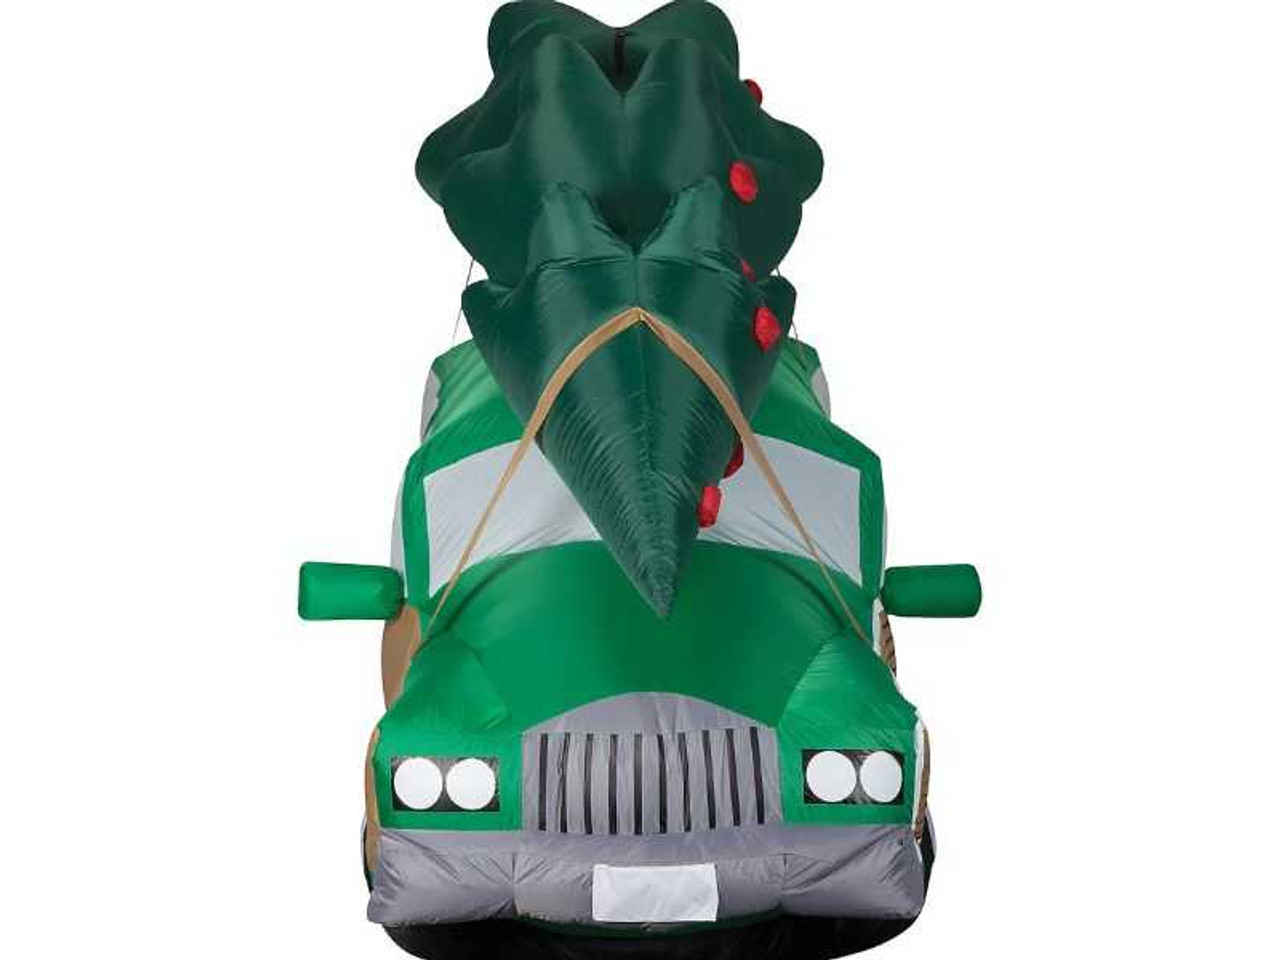 National Lampoons Christmas Vacation Car Inflatable